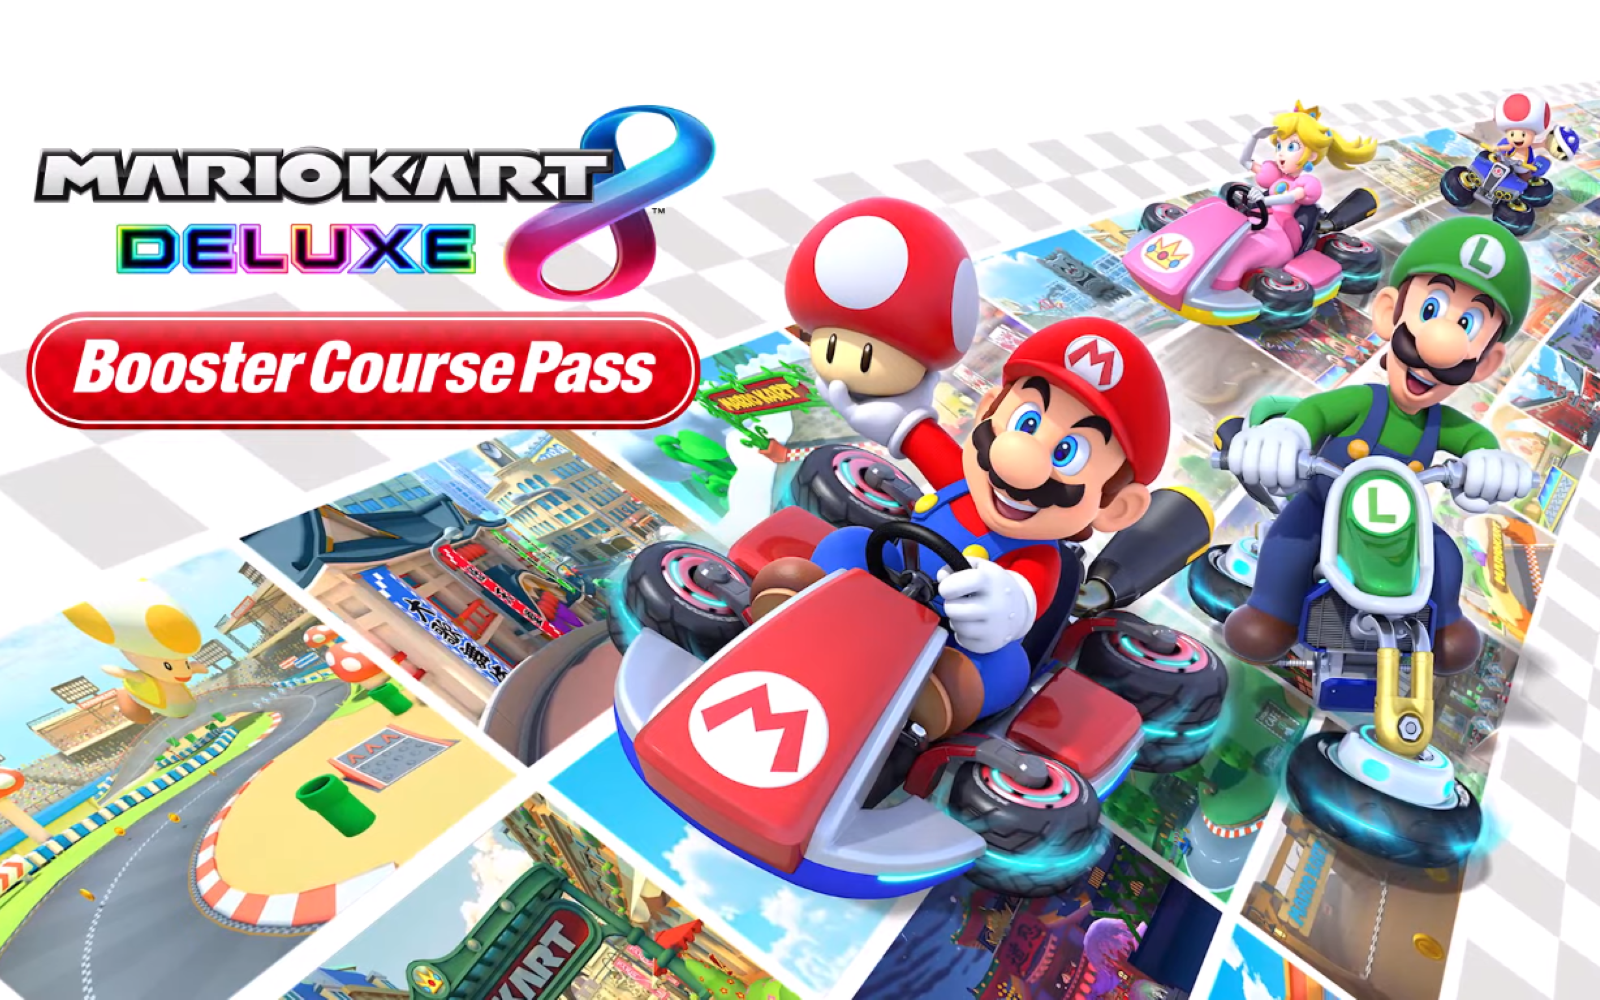 New Mario Kart 8 Deluxe DLC Will Add 48 Courses To The Game